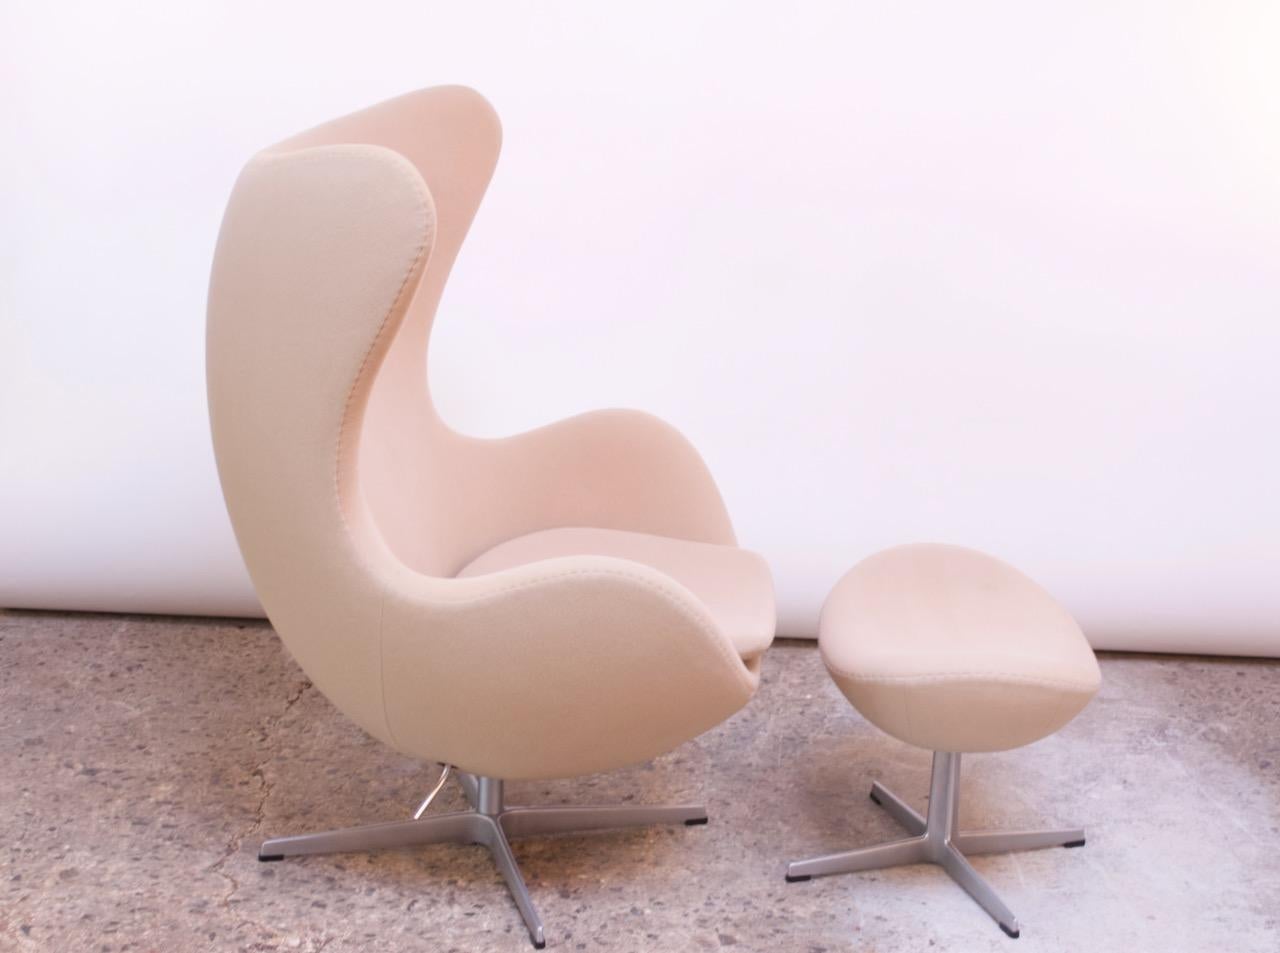 Late 20th Century Arne Jacobsen for Fritz Hansen Egg Chair and Ottoman Distributed by Knoll